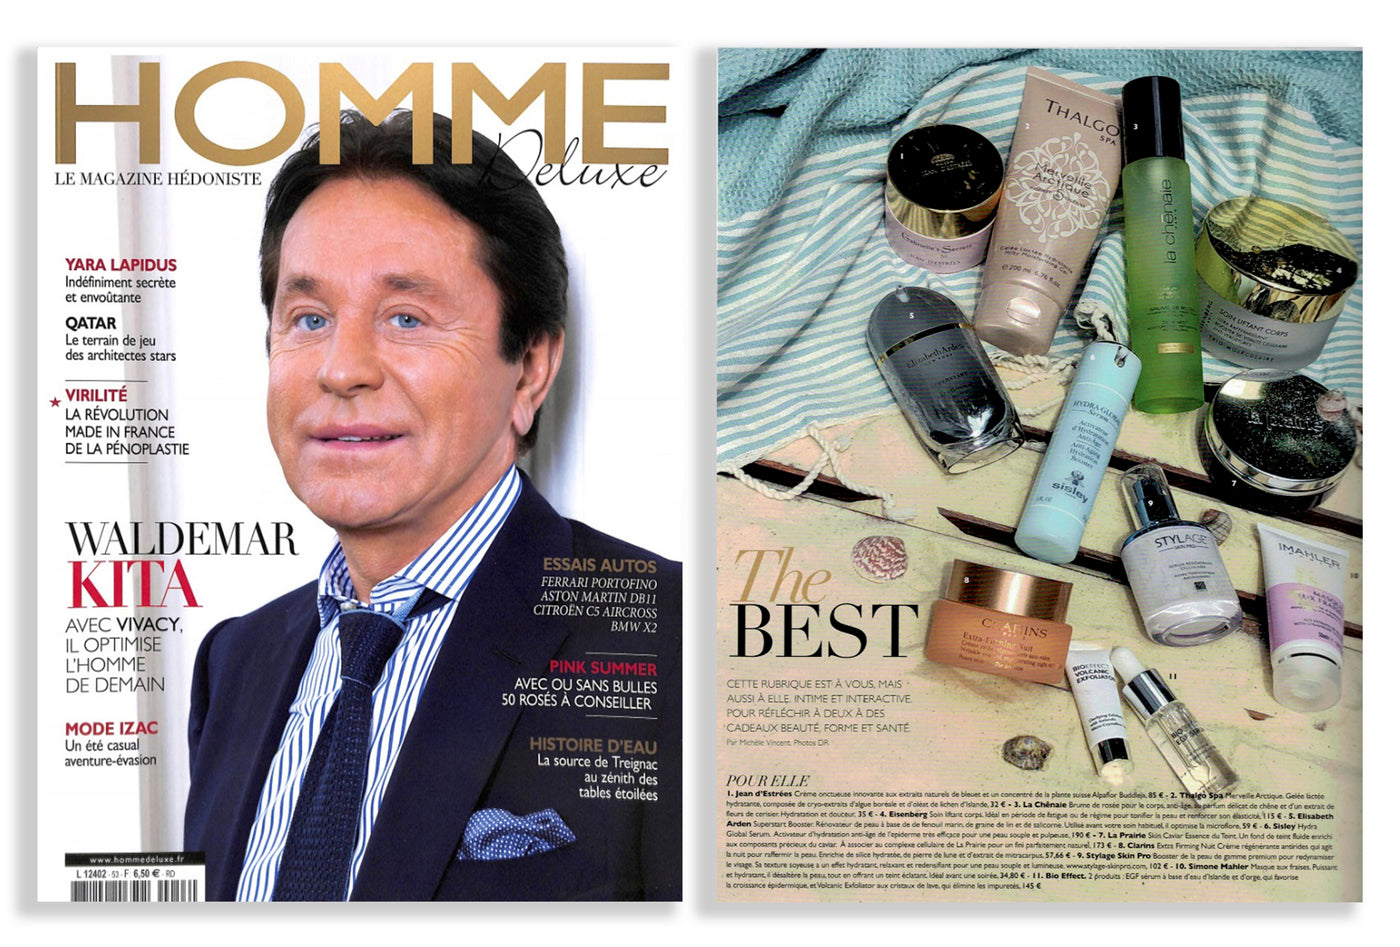 HOMME Deluxe - Septembre 2018